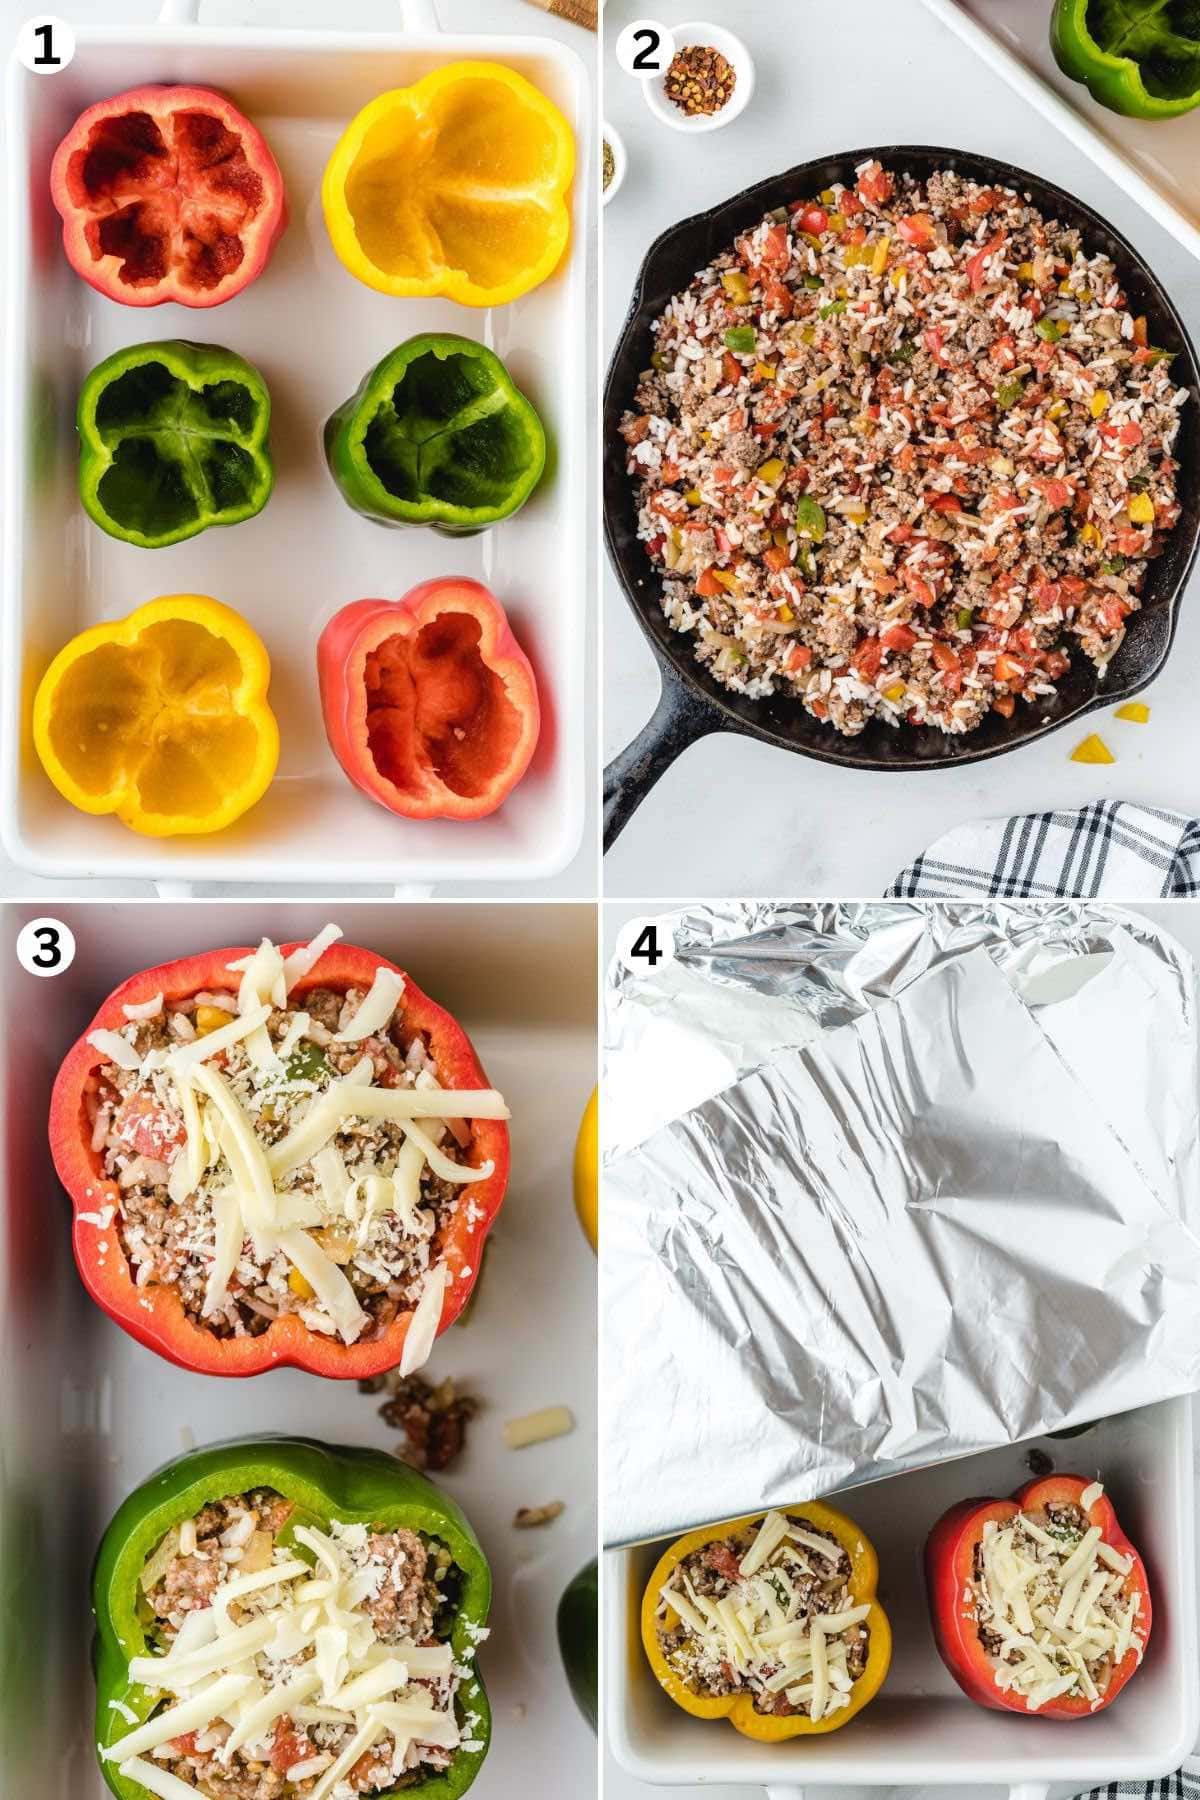 a couple of bell peppers on baking dish. the stuffing mixture in the pan. pour stuffing into the bell pepper and top with cheese. cover with aluminum foil and bake.